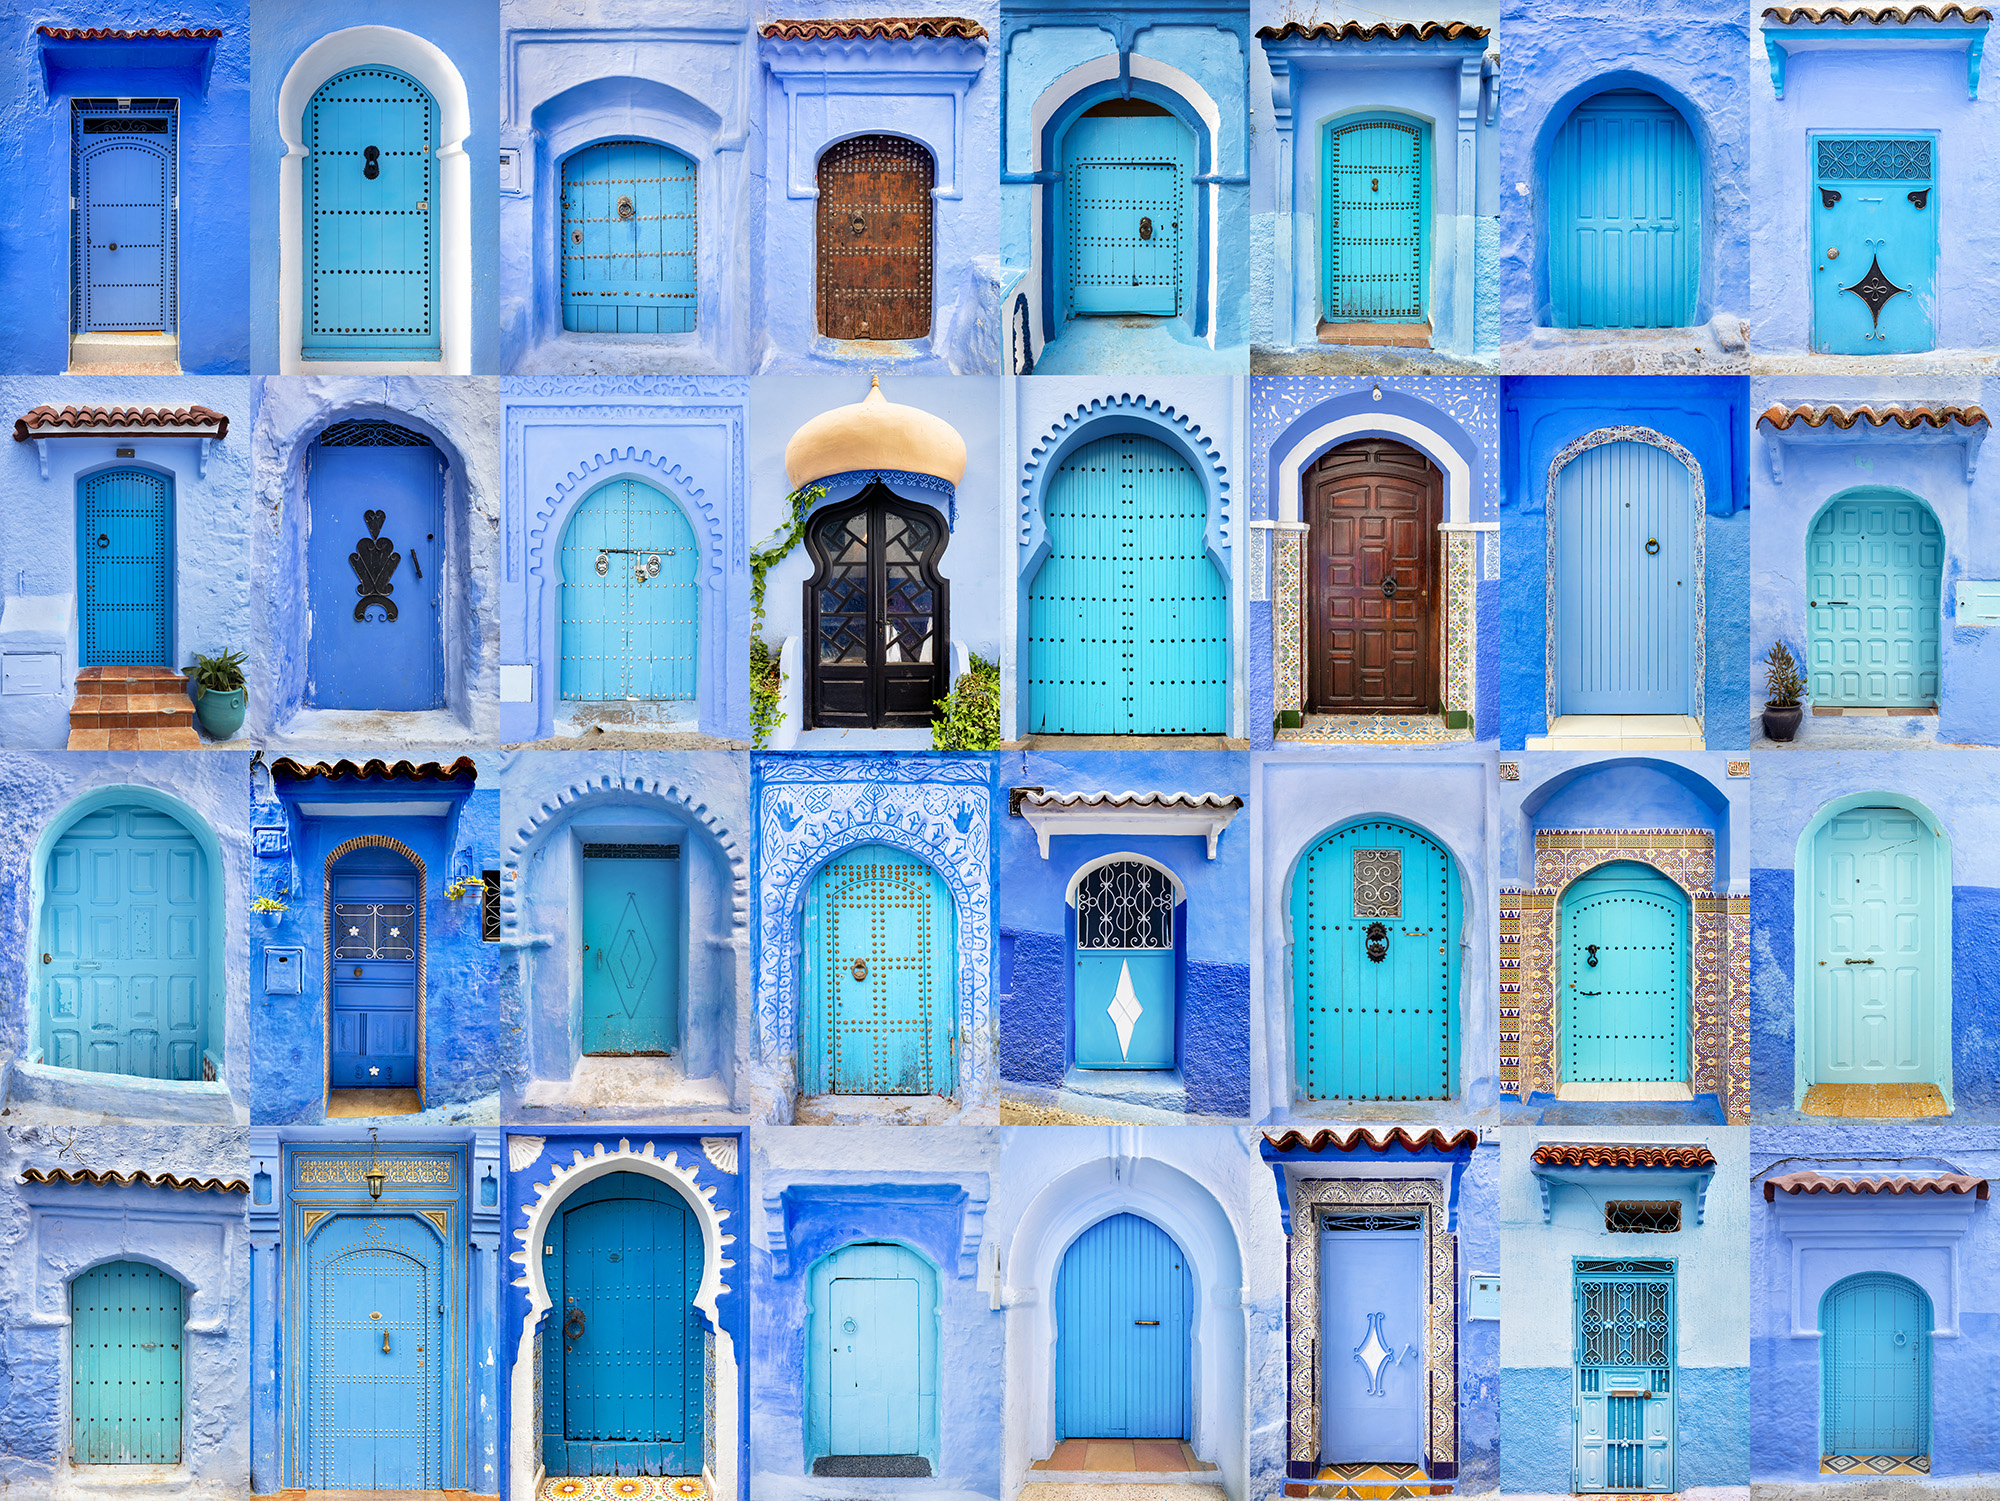 andrevicentegoncalves_windows_of_the_world_africa_morocco_chefchaouen.jpg